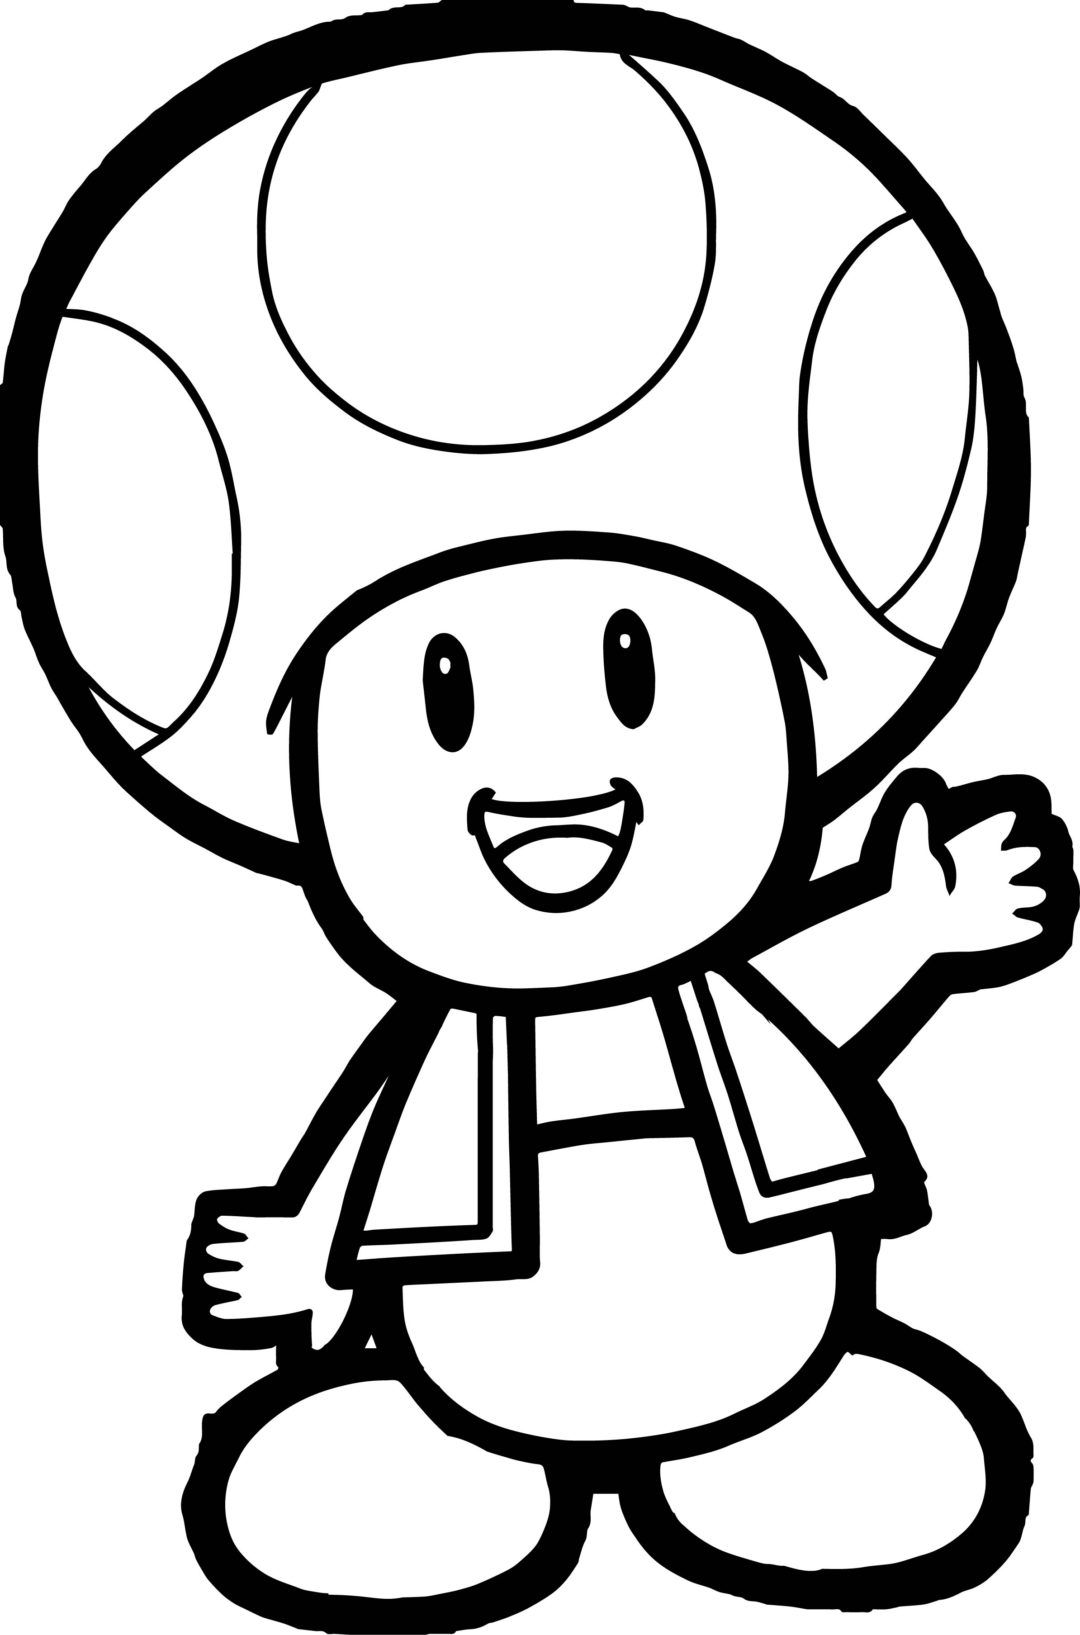 Super Mario Coloring Pages: 123 Adventures to Bring to Life with Color 2